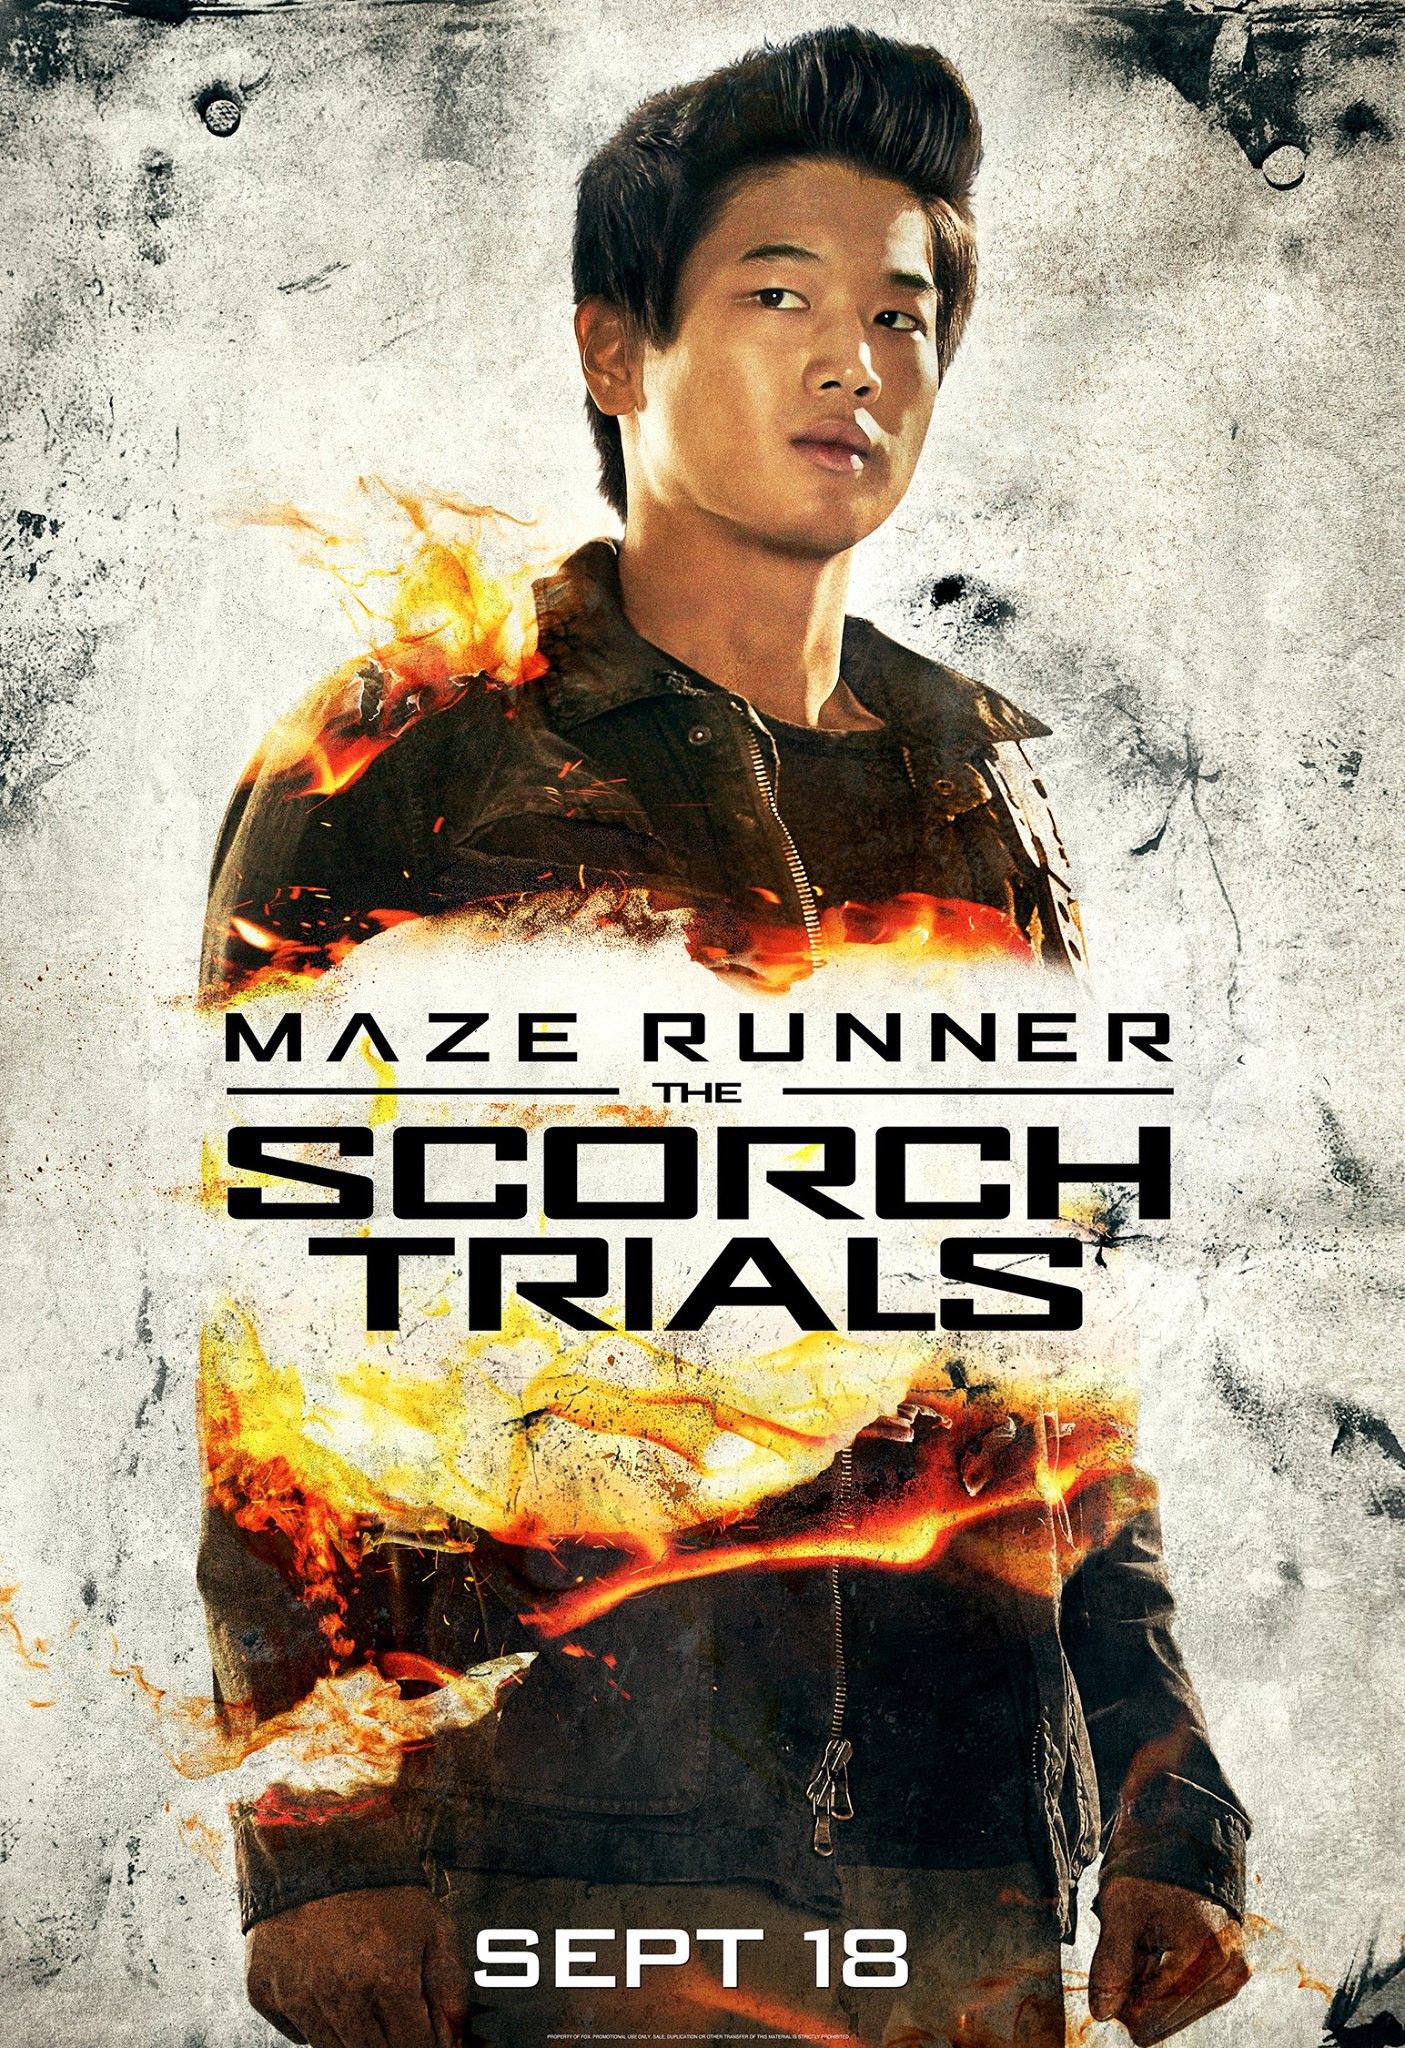 The Maze Runner Scorch Trials Character Poster 3